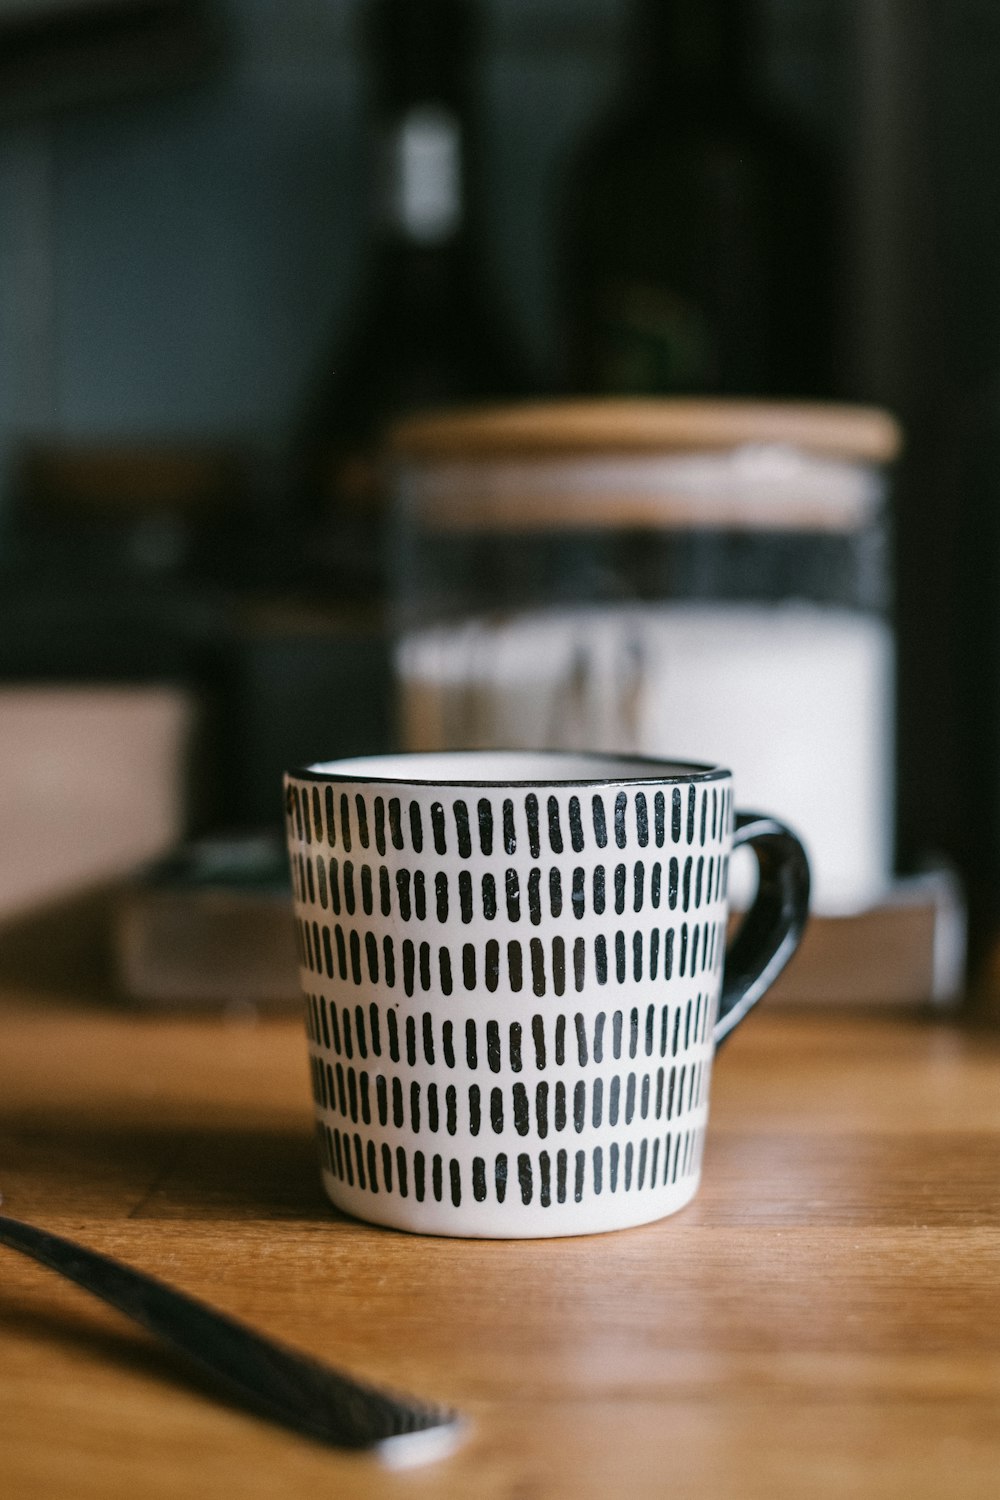 white and black ceramic mug on brown wooden table